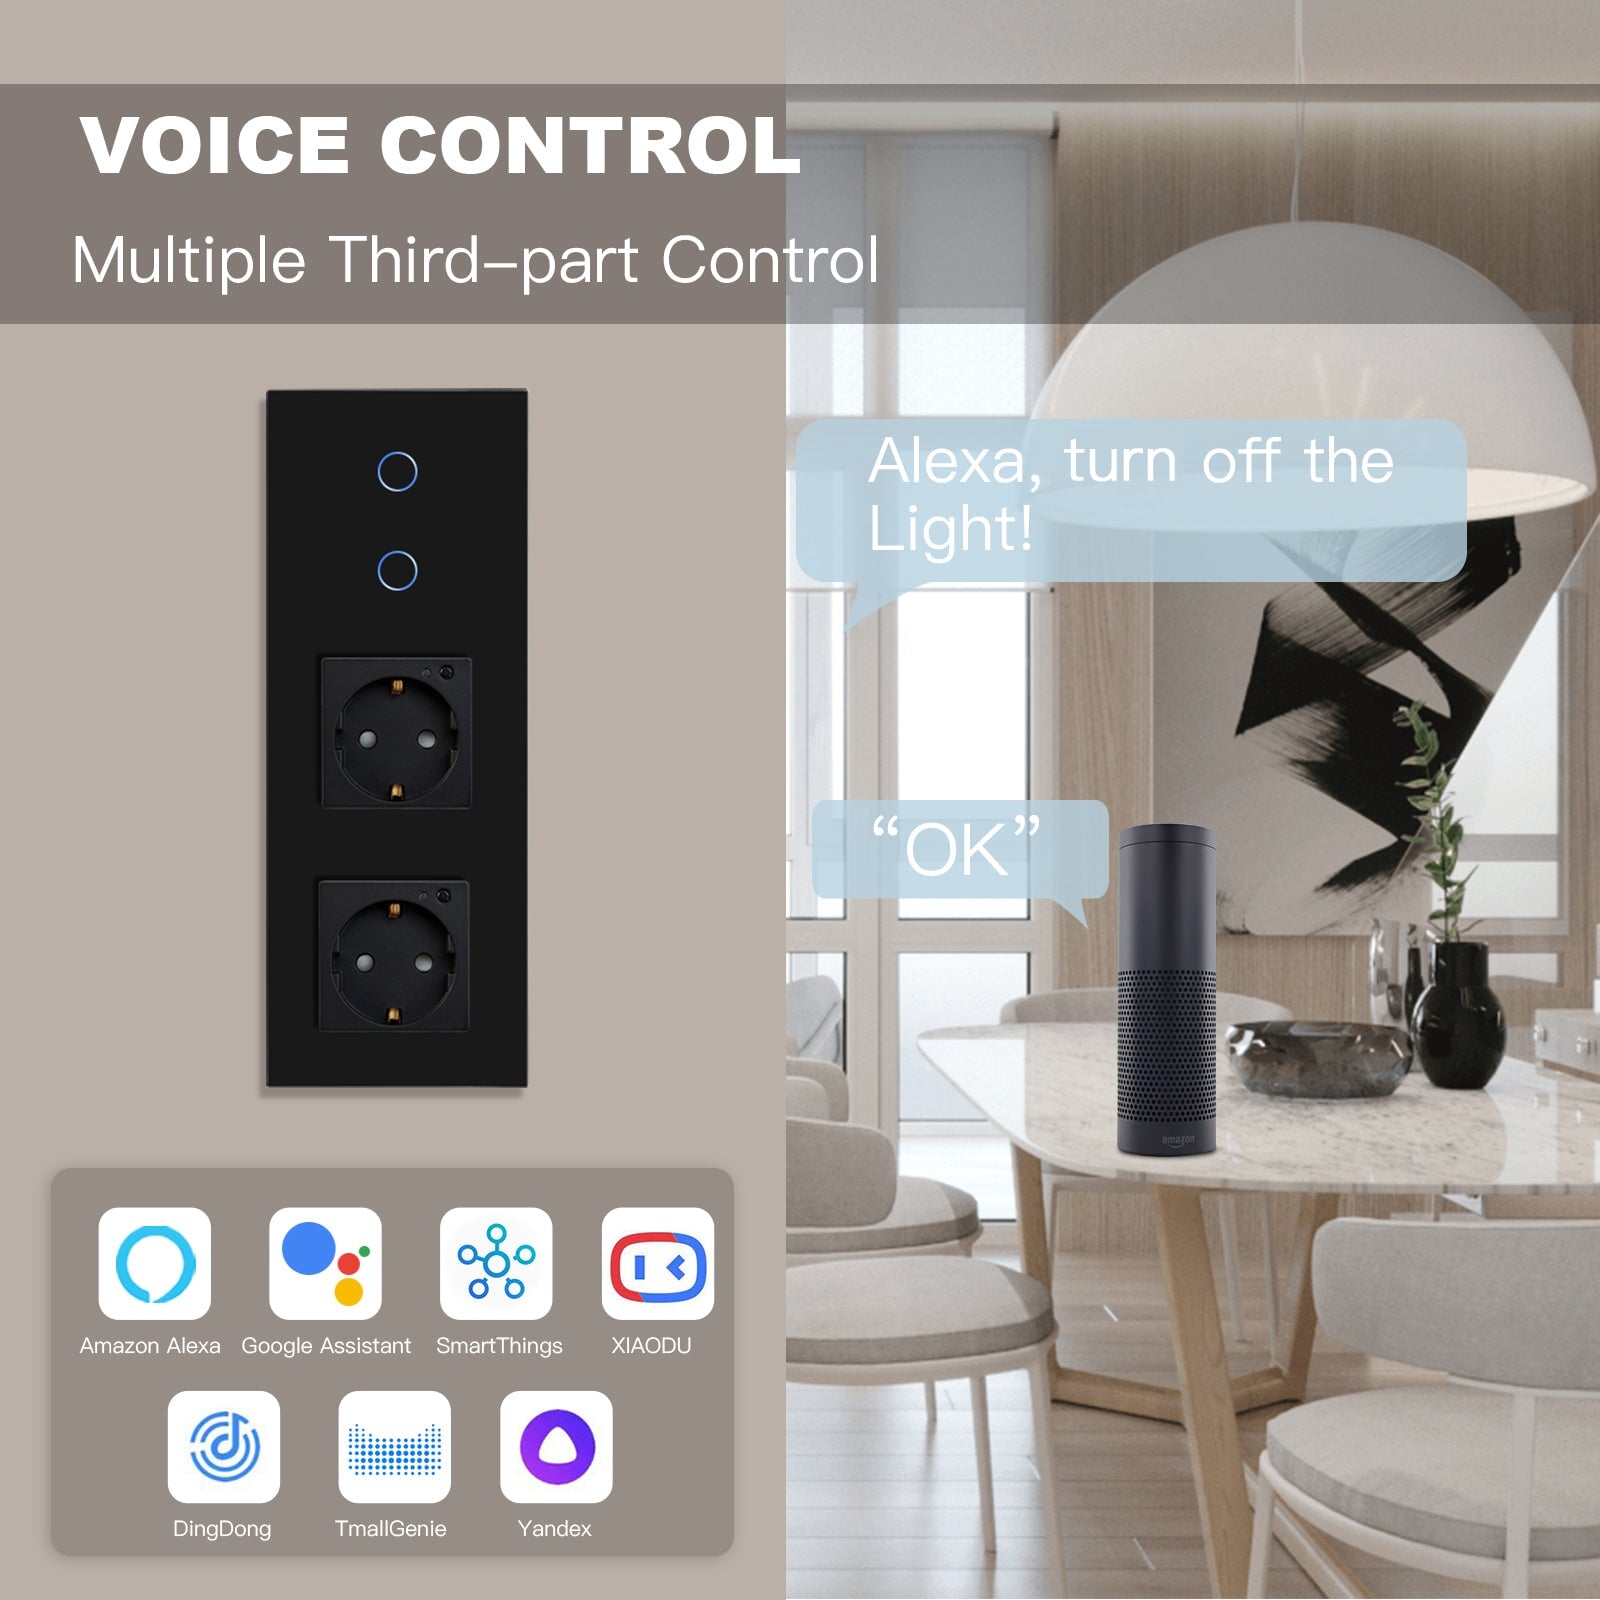 Bseed Smart WiFi 1/2/3 Gang Light Switches Multi Control With Double WiFi EU Standard Smart Wall Sockets Light Switches Bseedswitch 